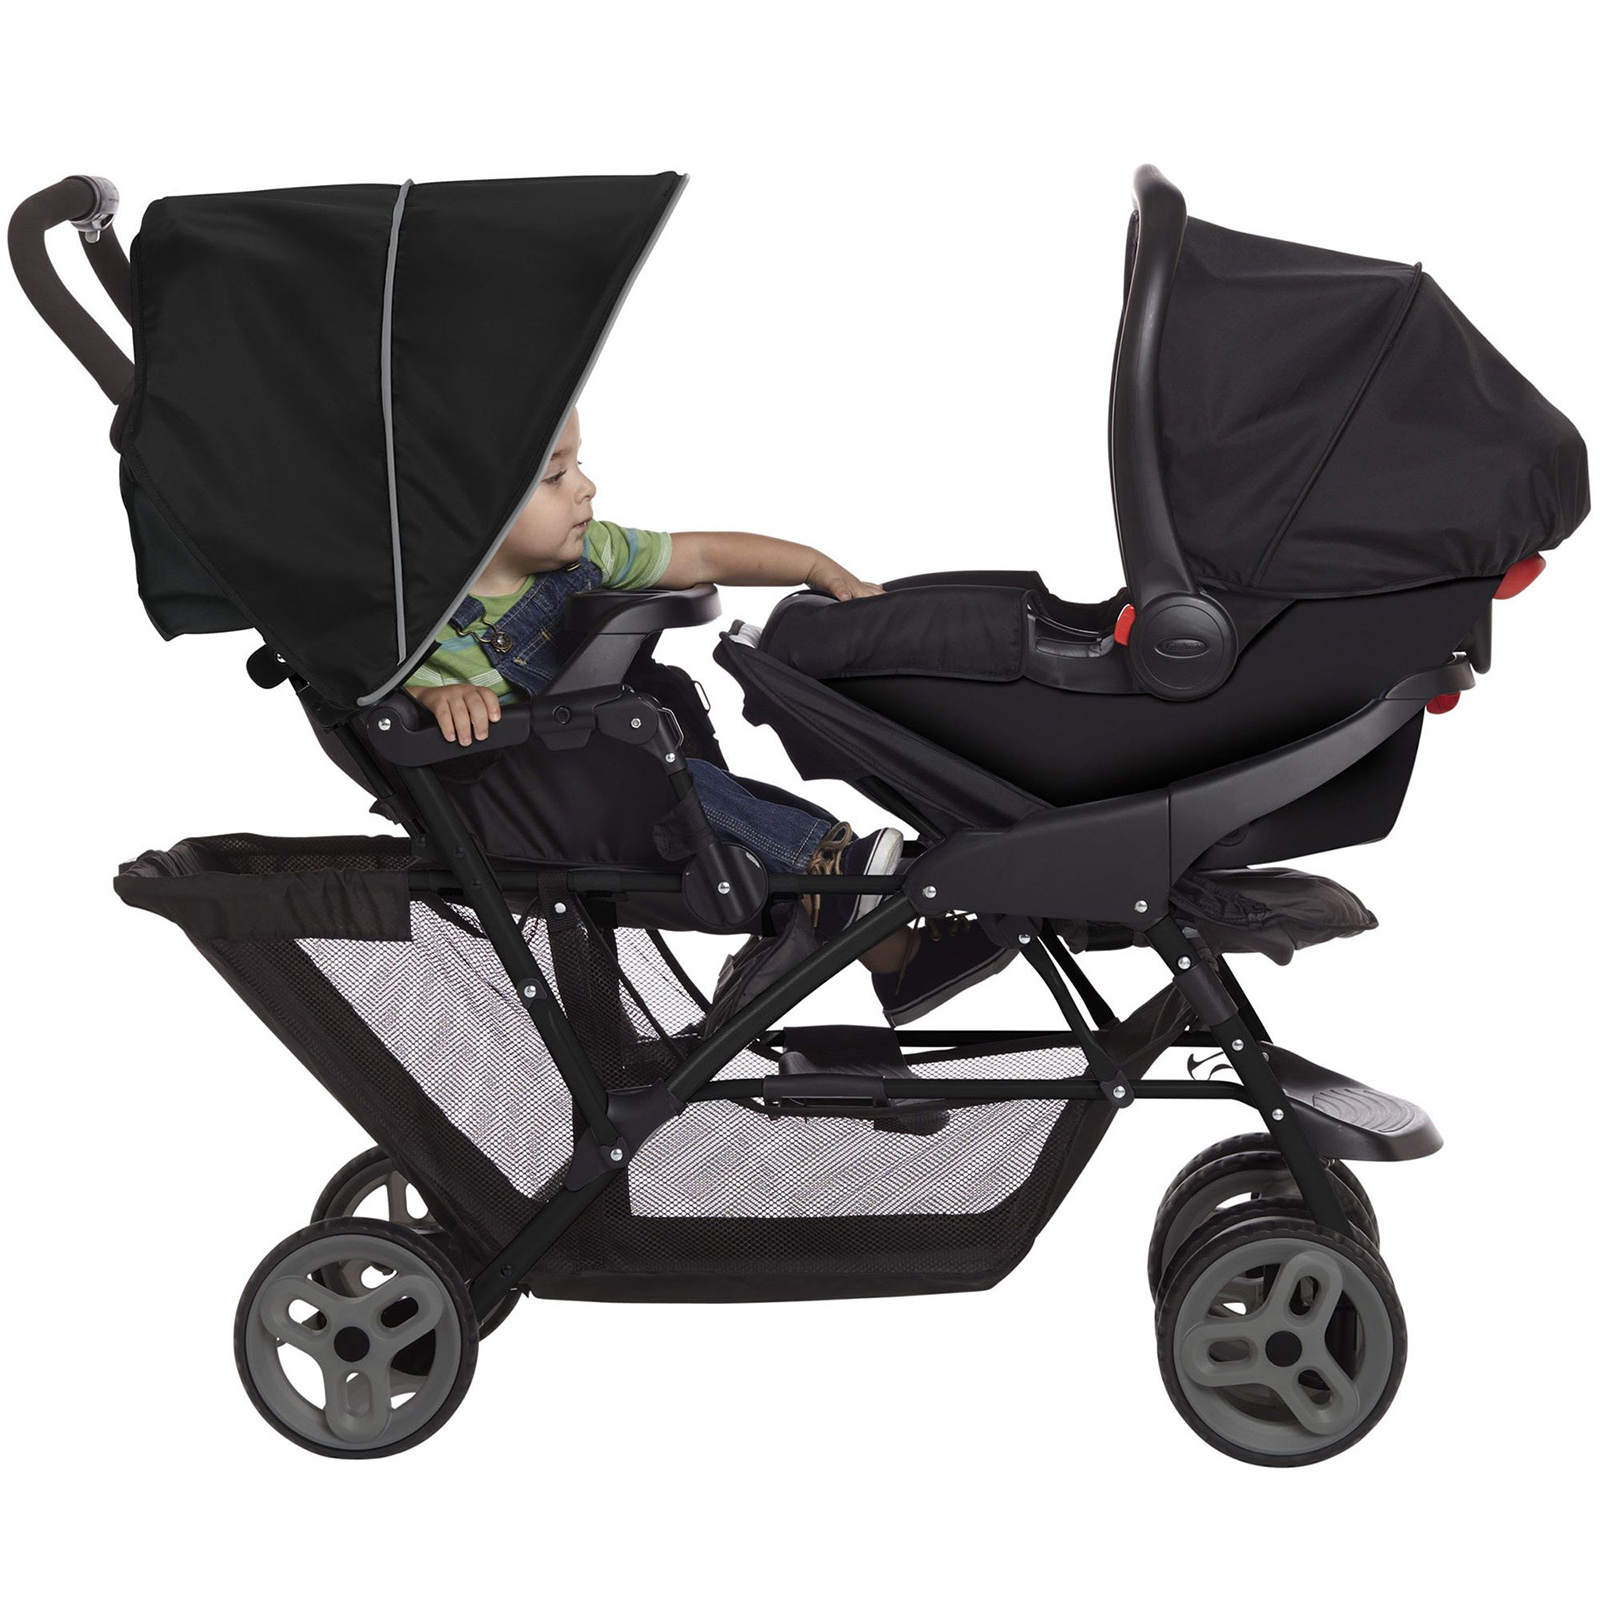 Graco Stadium Duo Double Pram Twin Travel System With 2 Snugride Car Seat Bases Black Grey